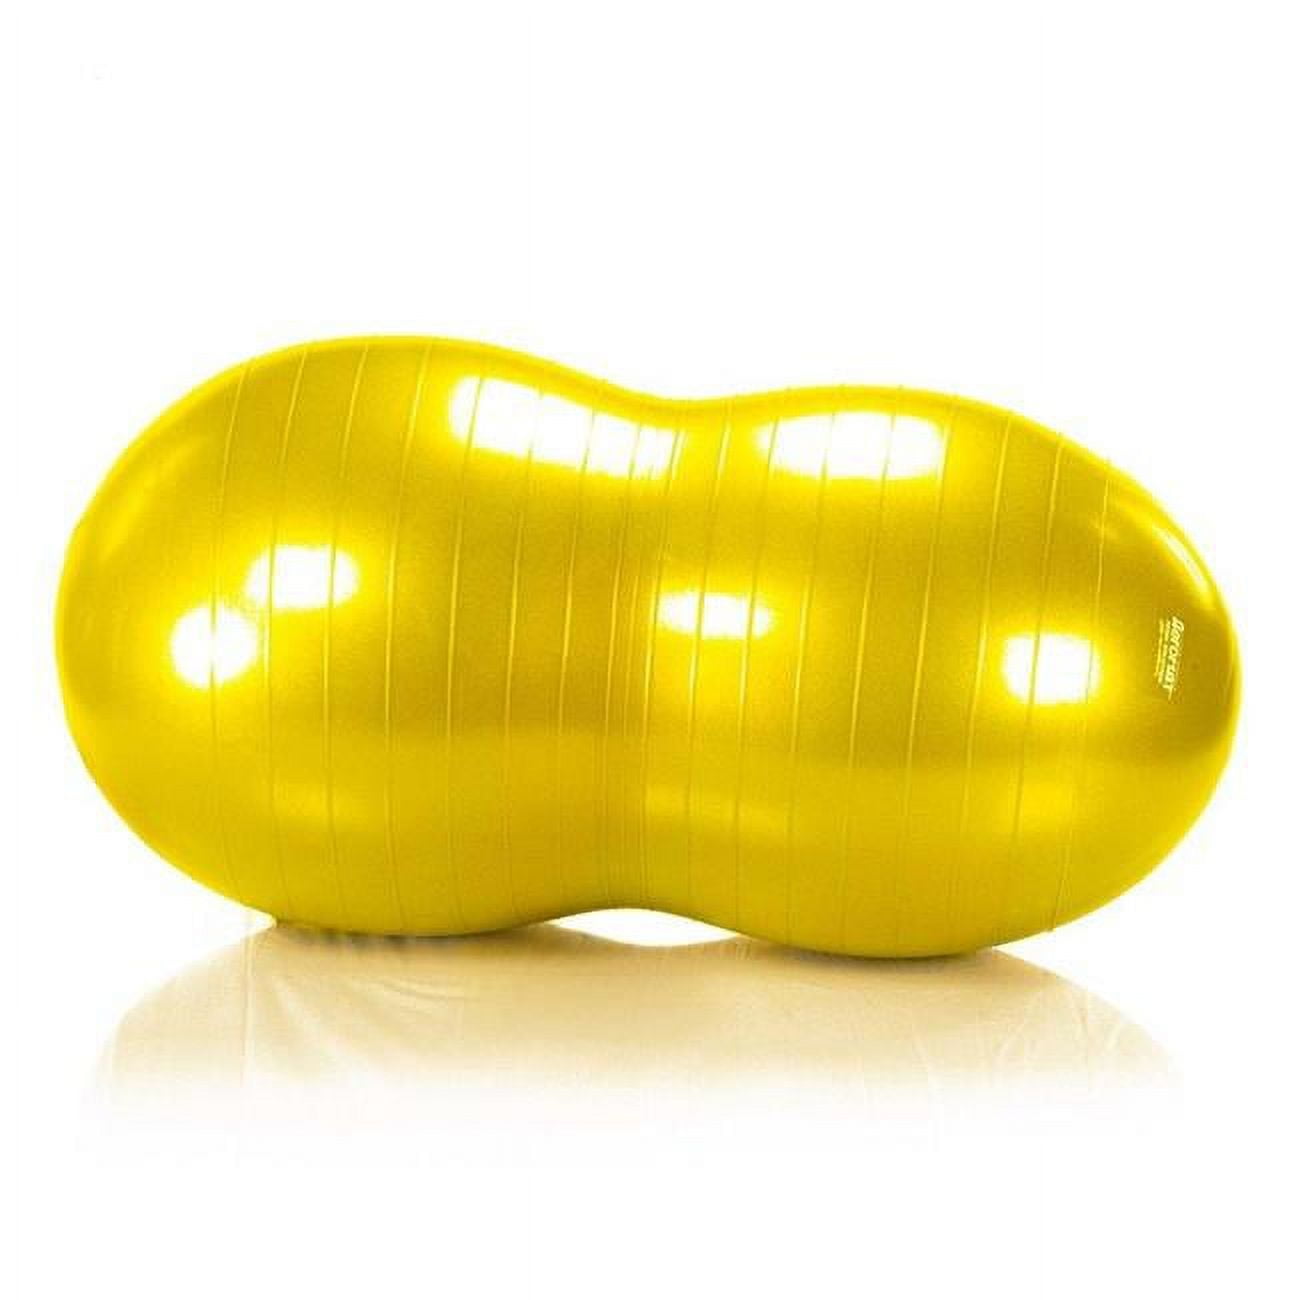 Picture of AGM Group 35248 70 cm Aero Mat Therapy Peanut Ball Burst Resistance, Yellow